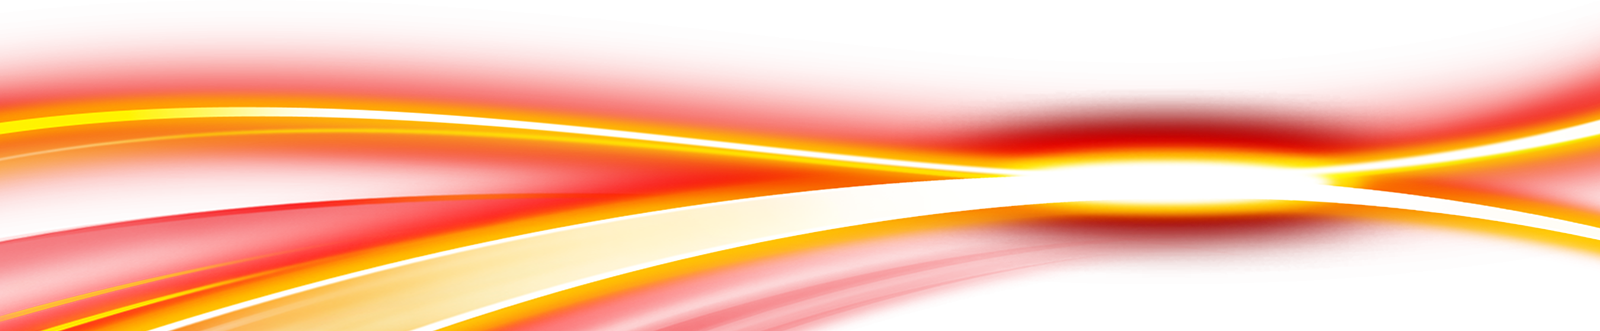 Download Light Png Images Red Light Beam Png Png Image With No Background Pngkey Com